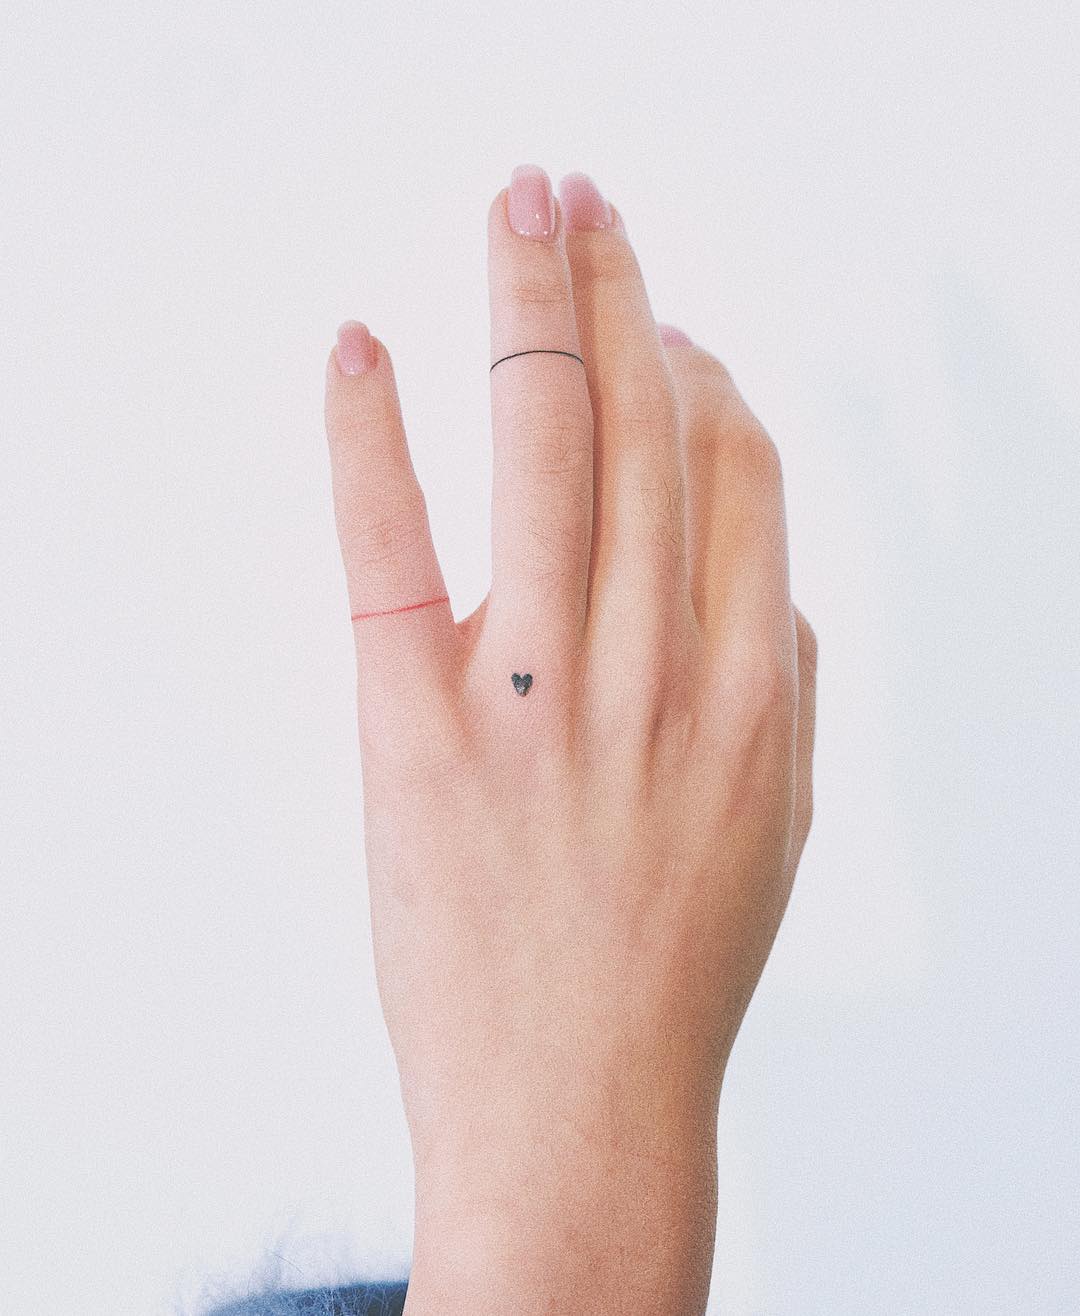 43 Wedding Ring Tattoos To Honor True Love - Our Mindful Life